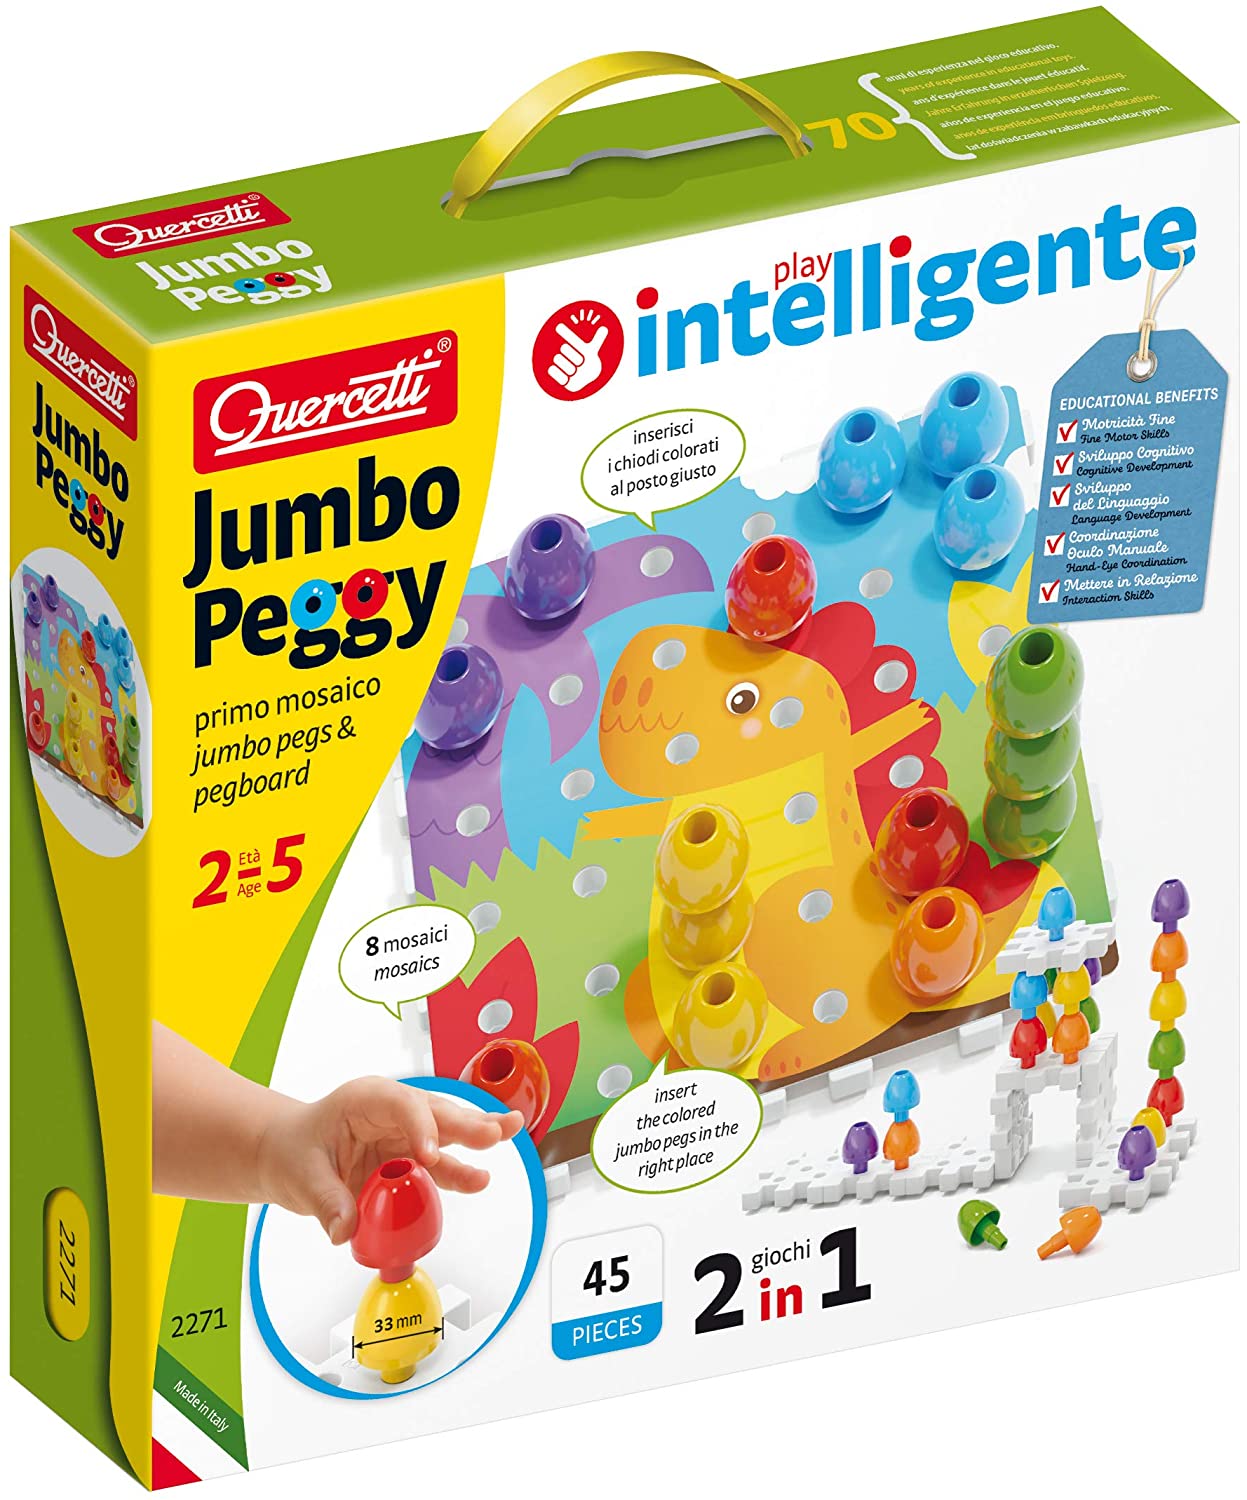 Quercetti - Jumbo Peggy - 45 pieces - Plug-in game